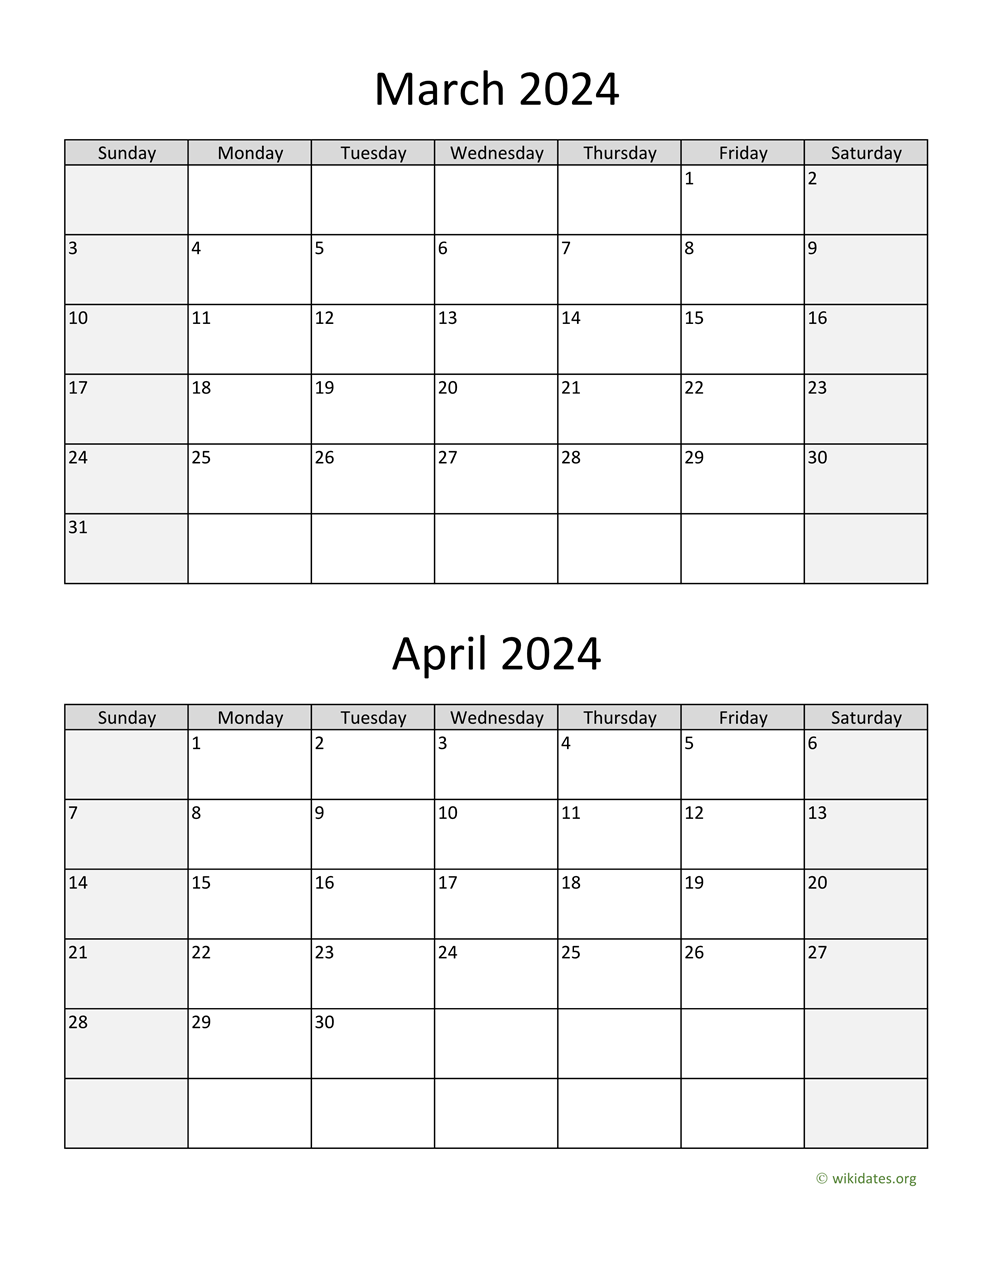 March And April 2024 Calendar | Wikidates for March April Calendar 2024 Printable